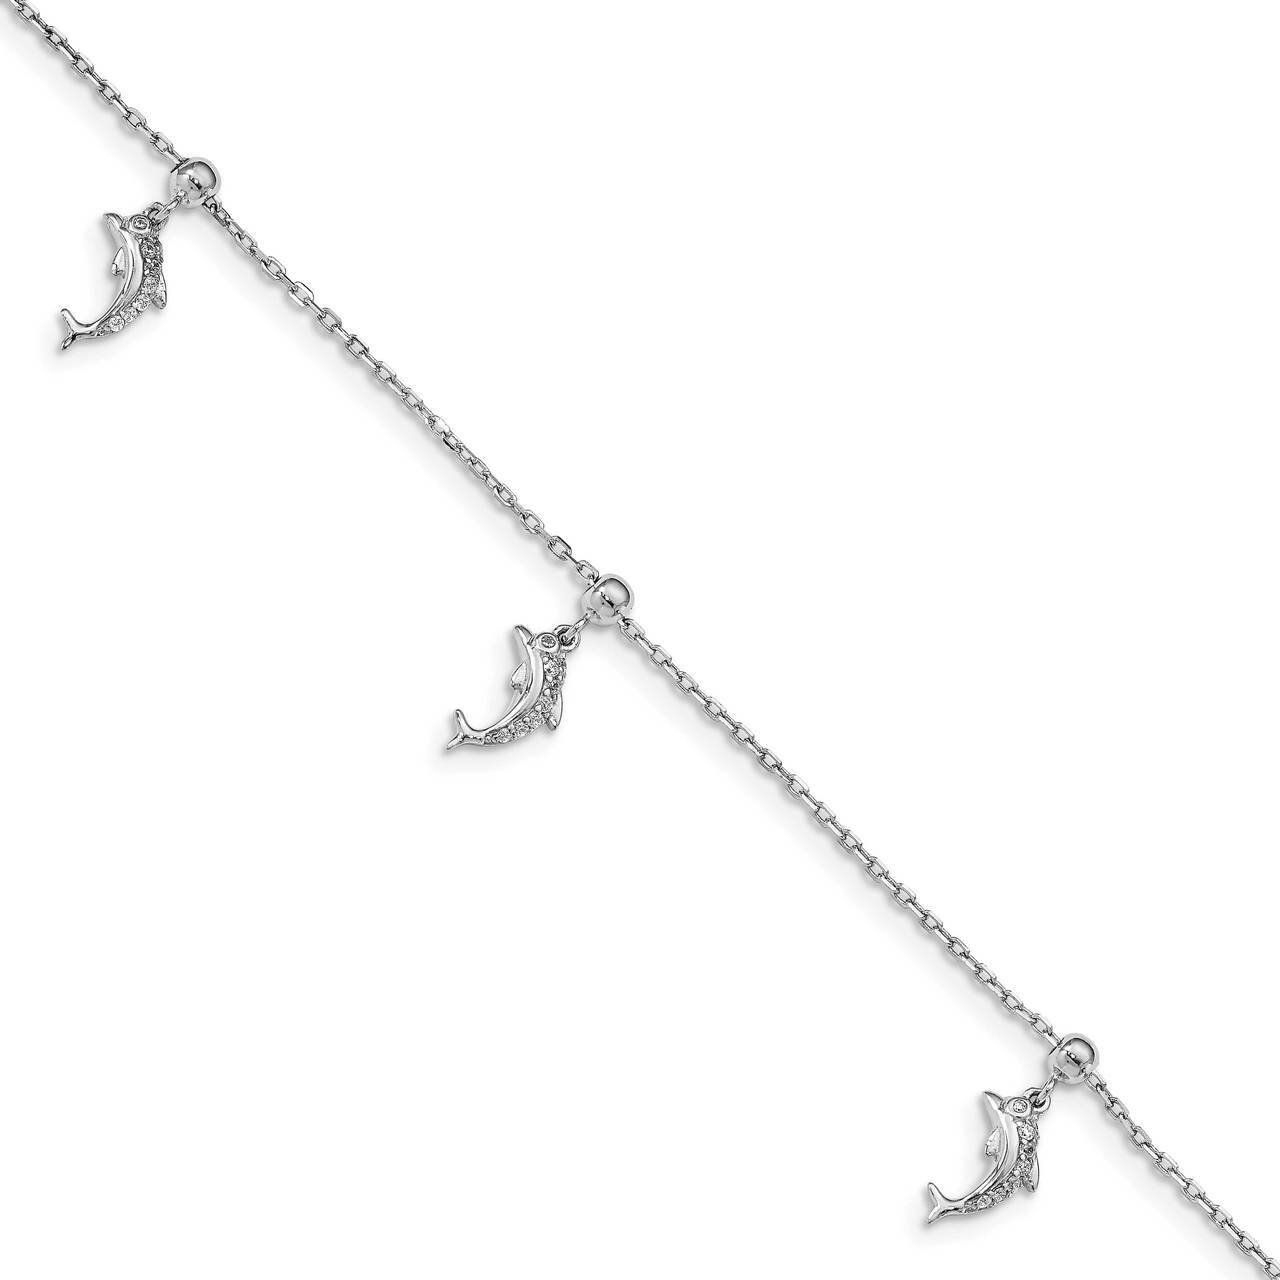 Dolphin Dangle 6.5 in with 1 inch Extender Bracelet Sterling Silver Rhodium-plated CZ Diamond QG4967-6.5